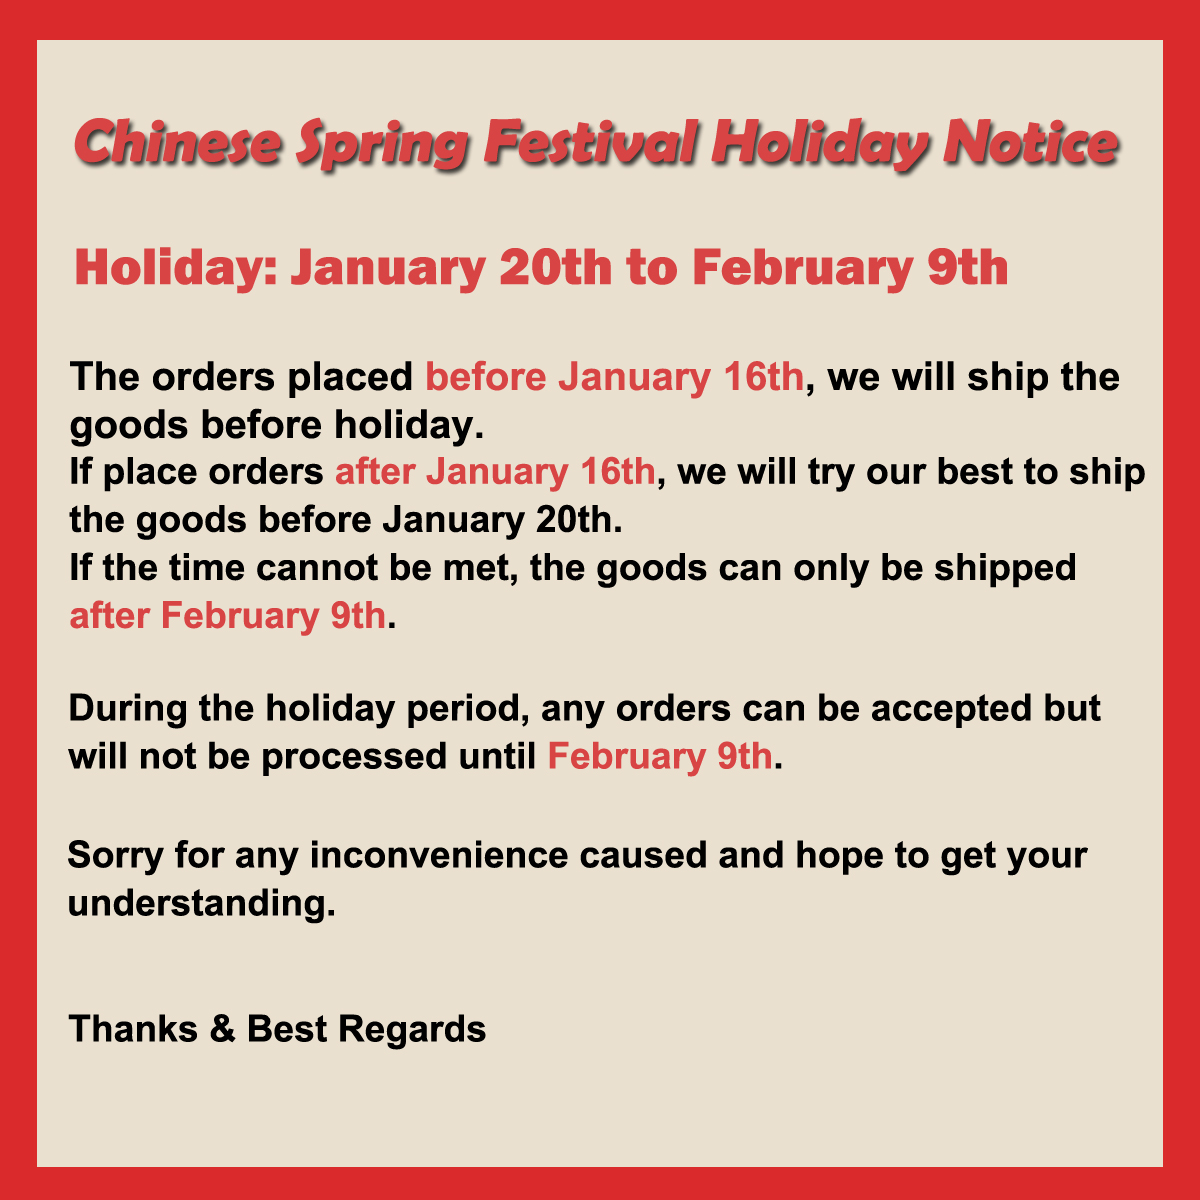 Chinese Spring Festival Holiday Notice